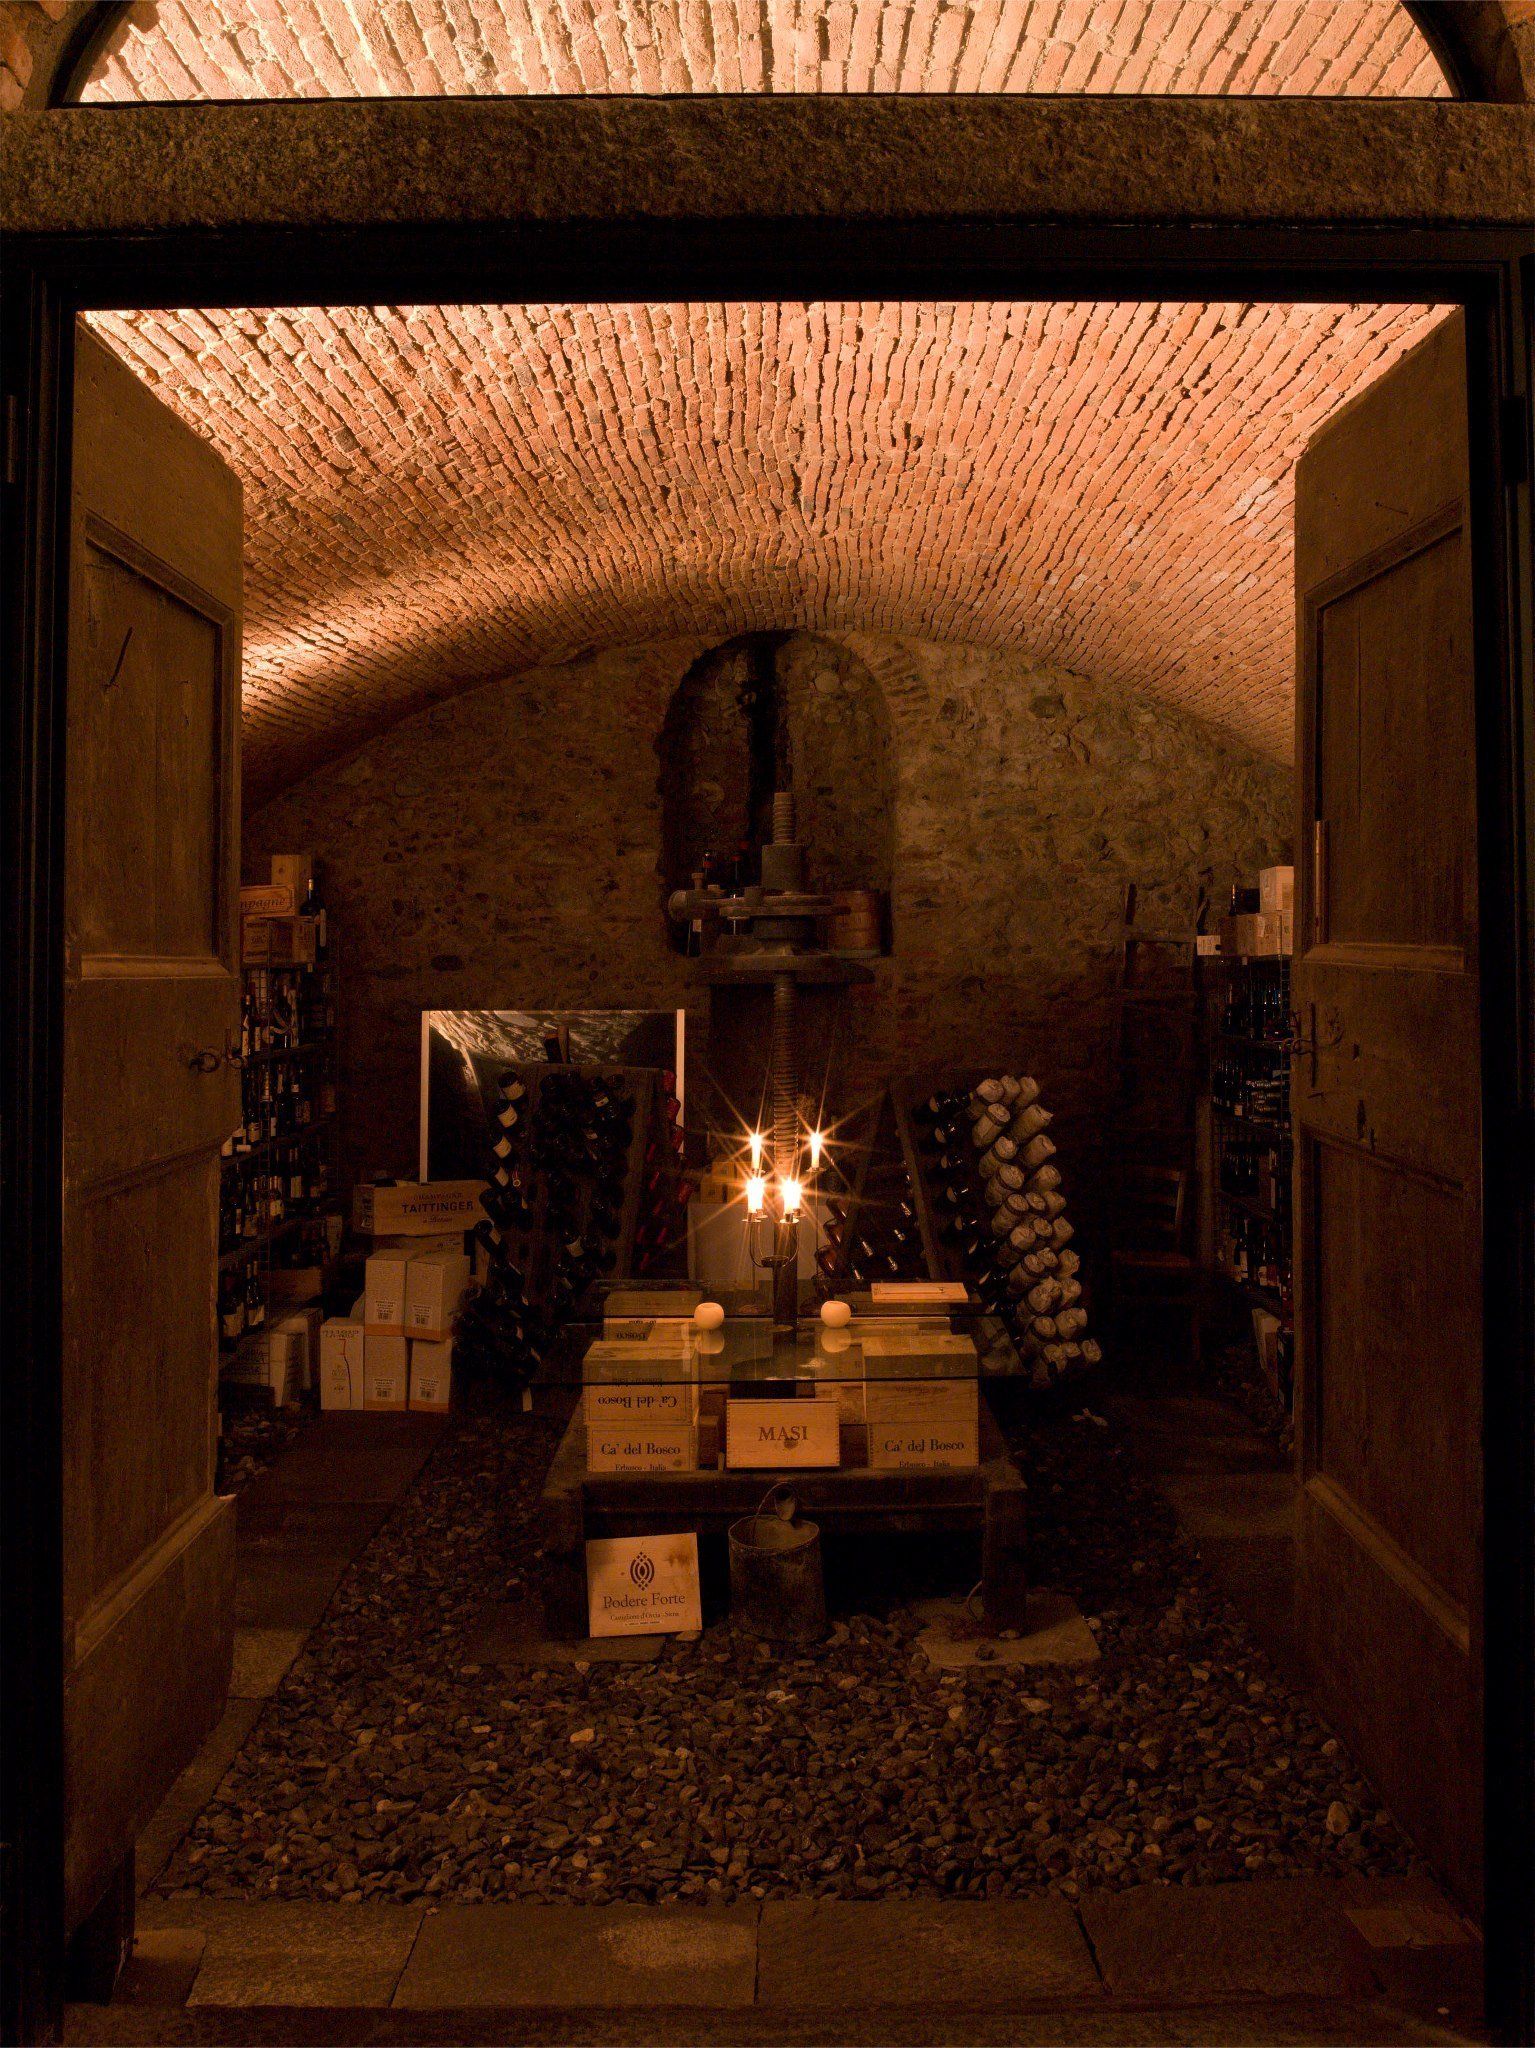 view inside a cellar with a table and candles